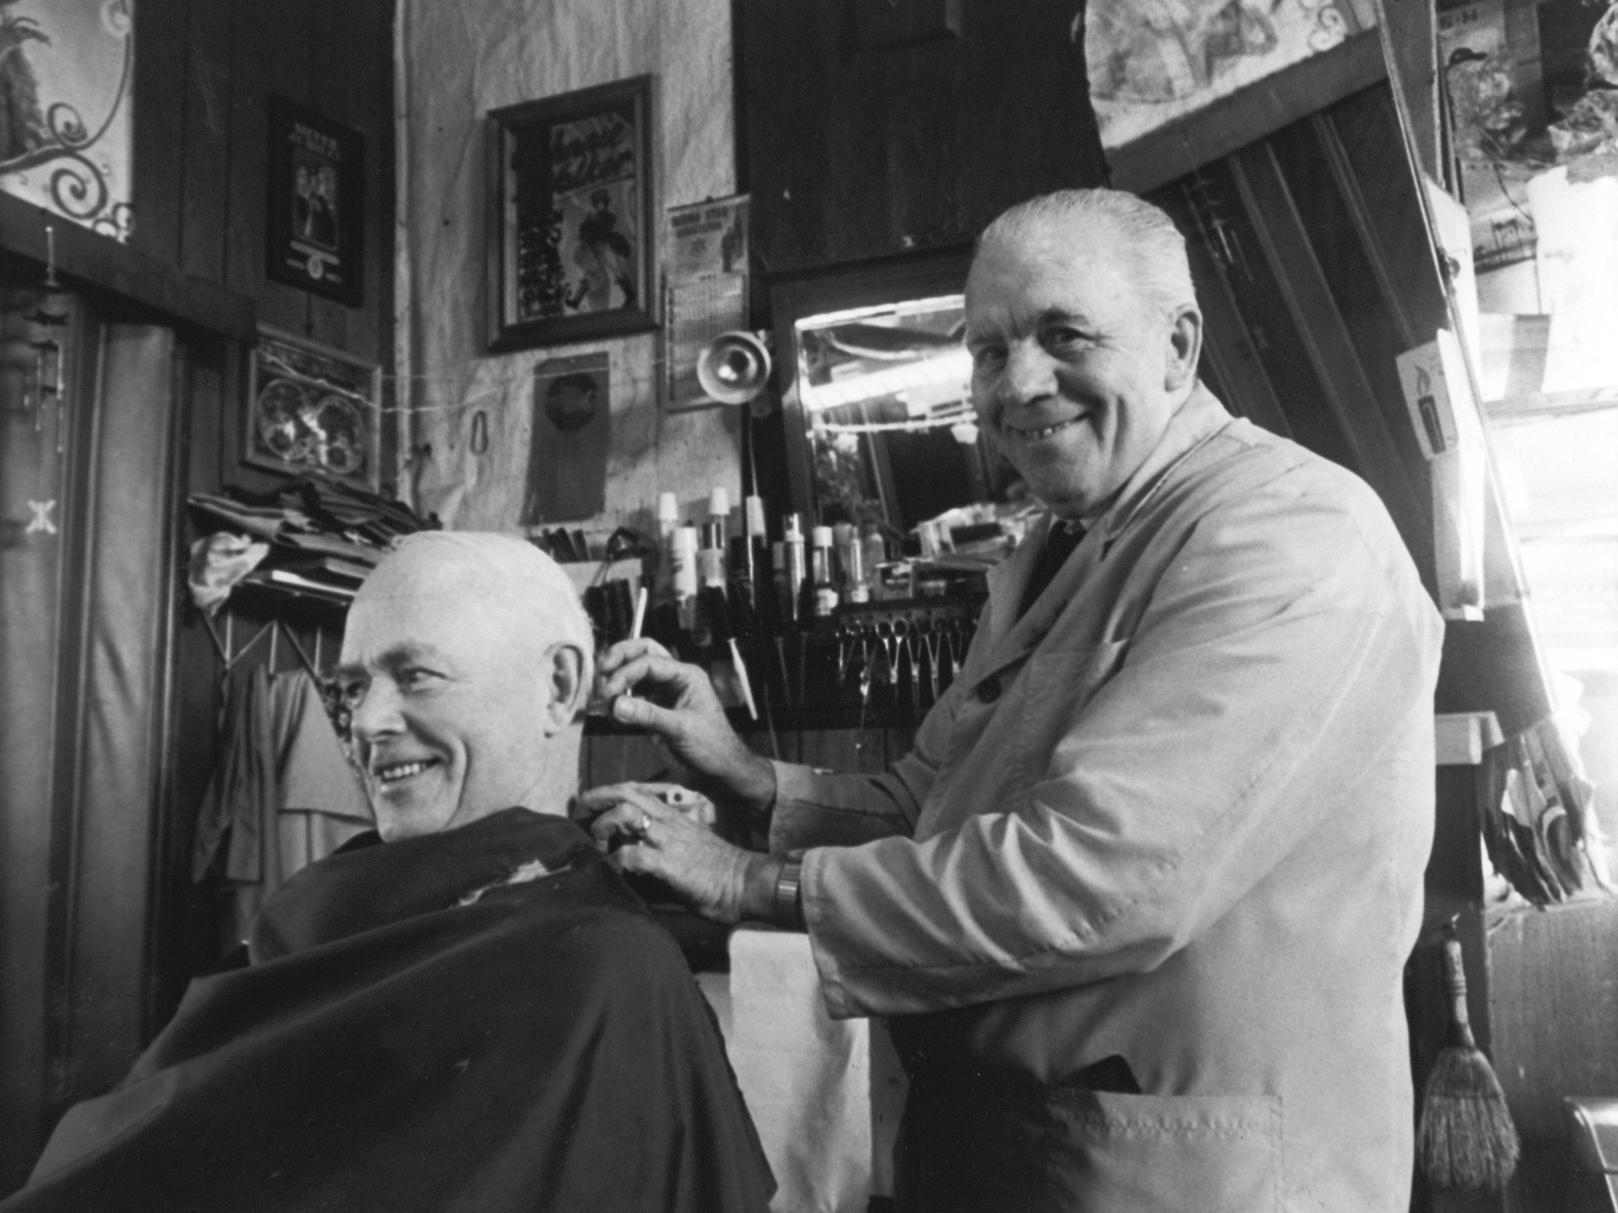 Do you get your hair cut by Tom Winterbottom at his barbers shop on Wellington Road back in the day?